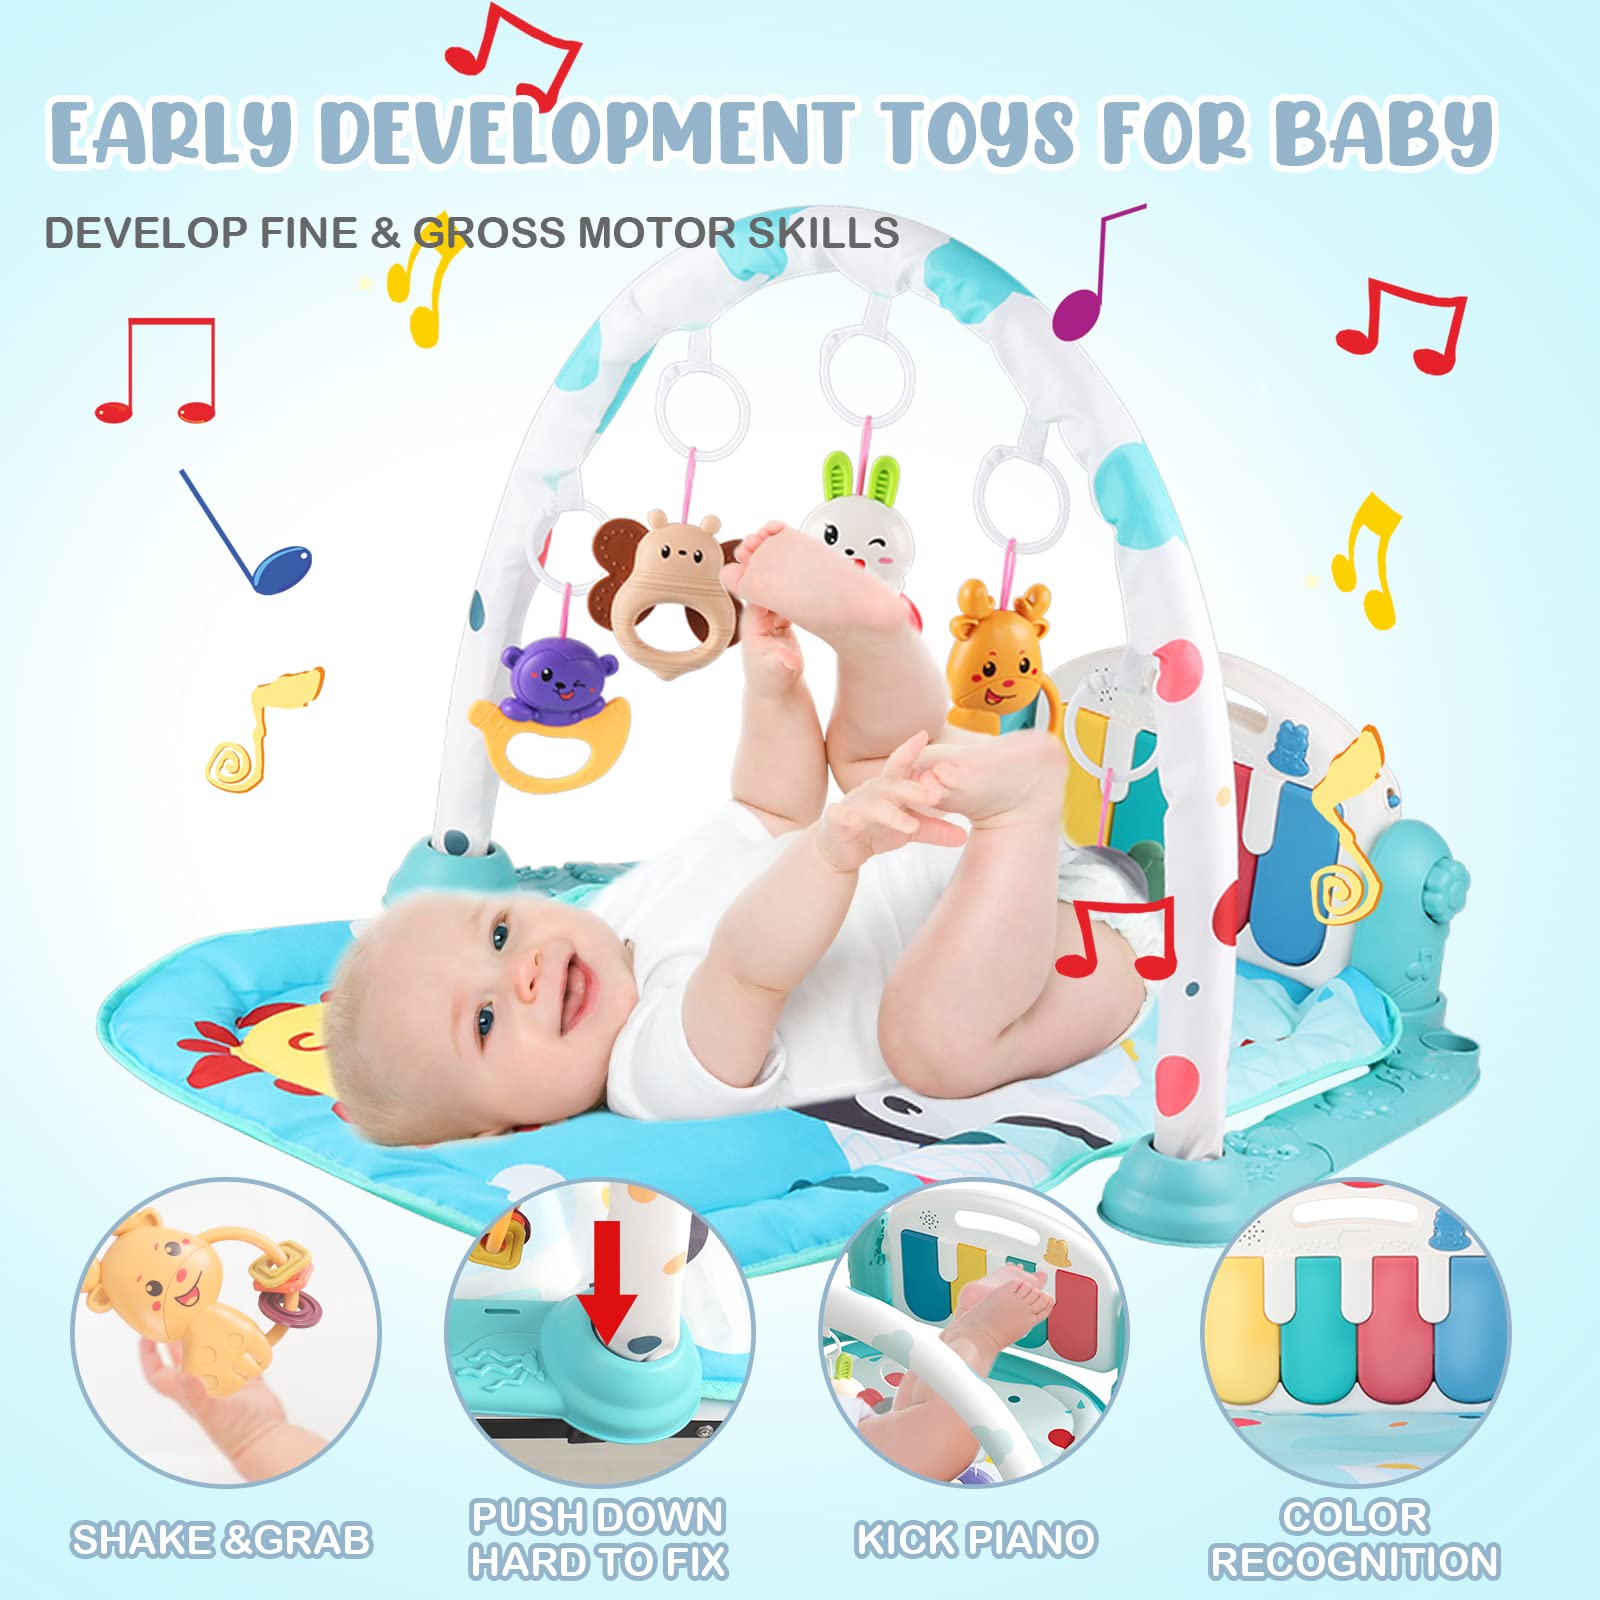 3 in 1 Baby Activity Play Mat Infant Play Gym Kids Musical Play Crawling Mat with Hanging Toys and Lights Best Gift for Baby Boy and Girl, Blue - image 3 of 10